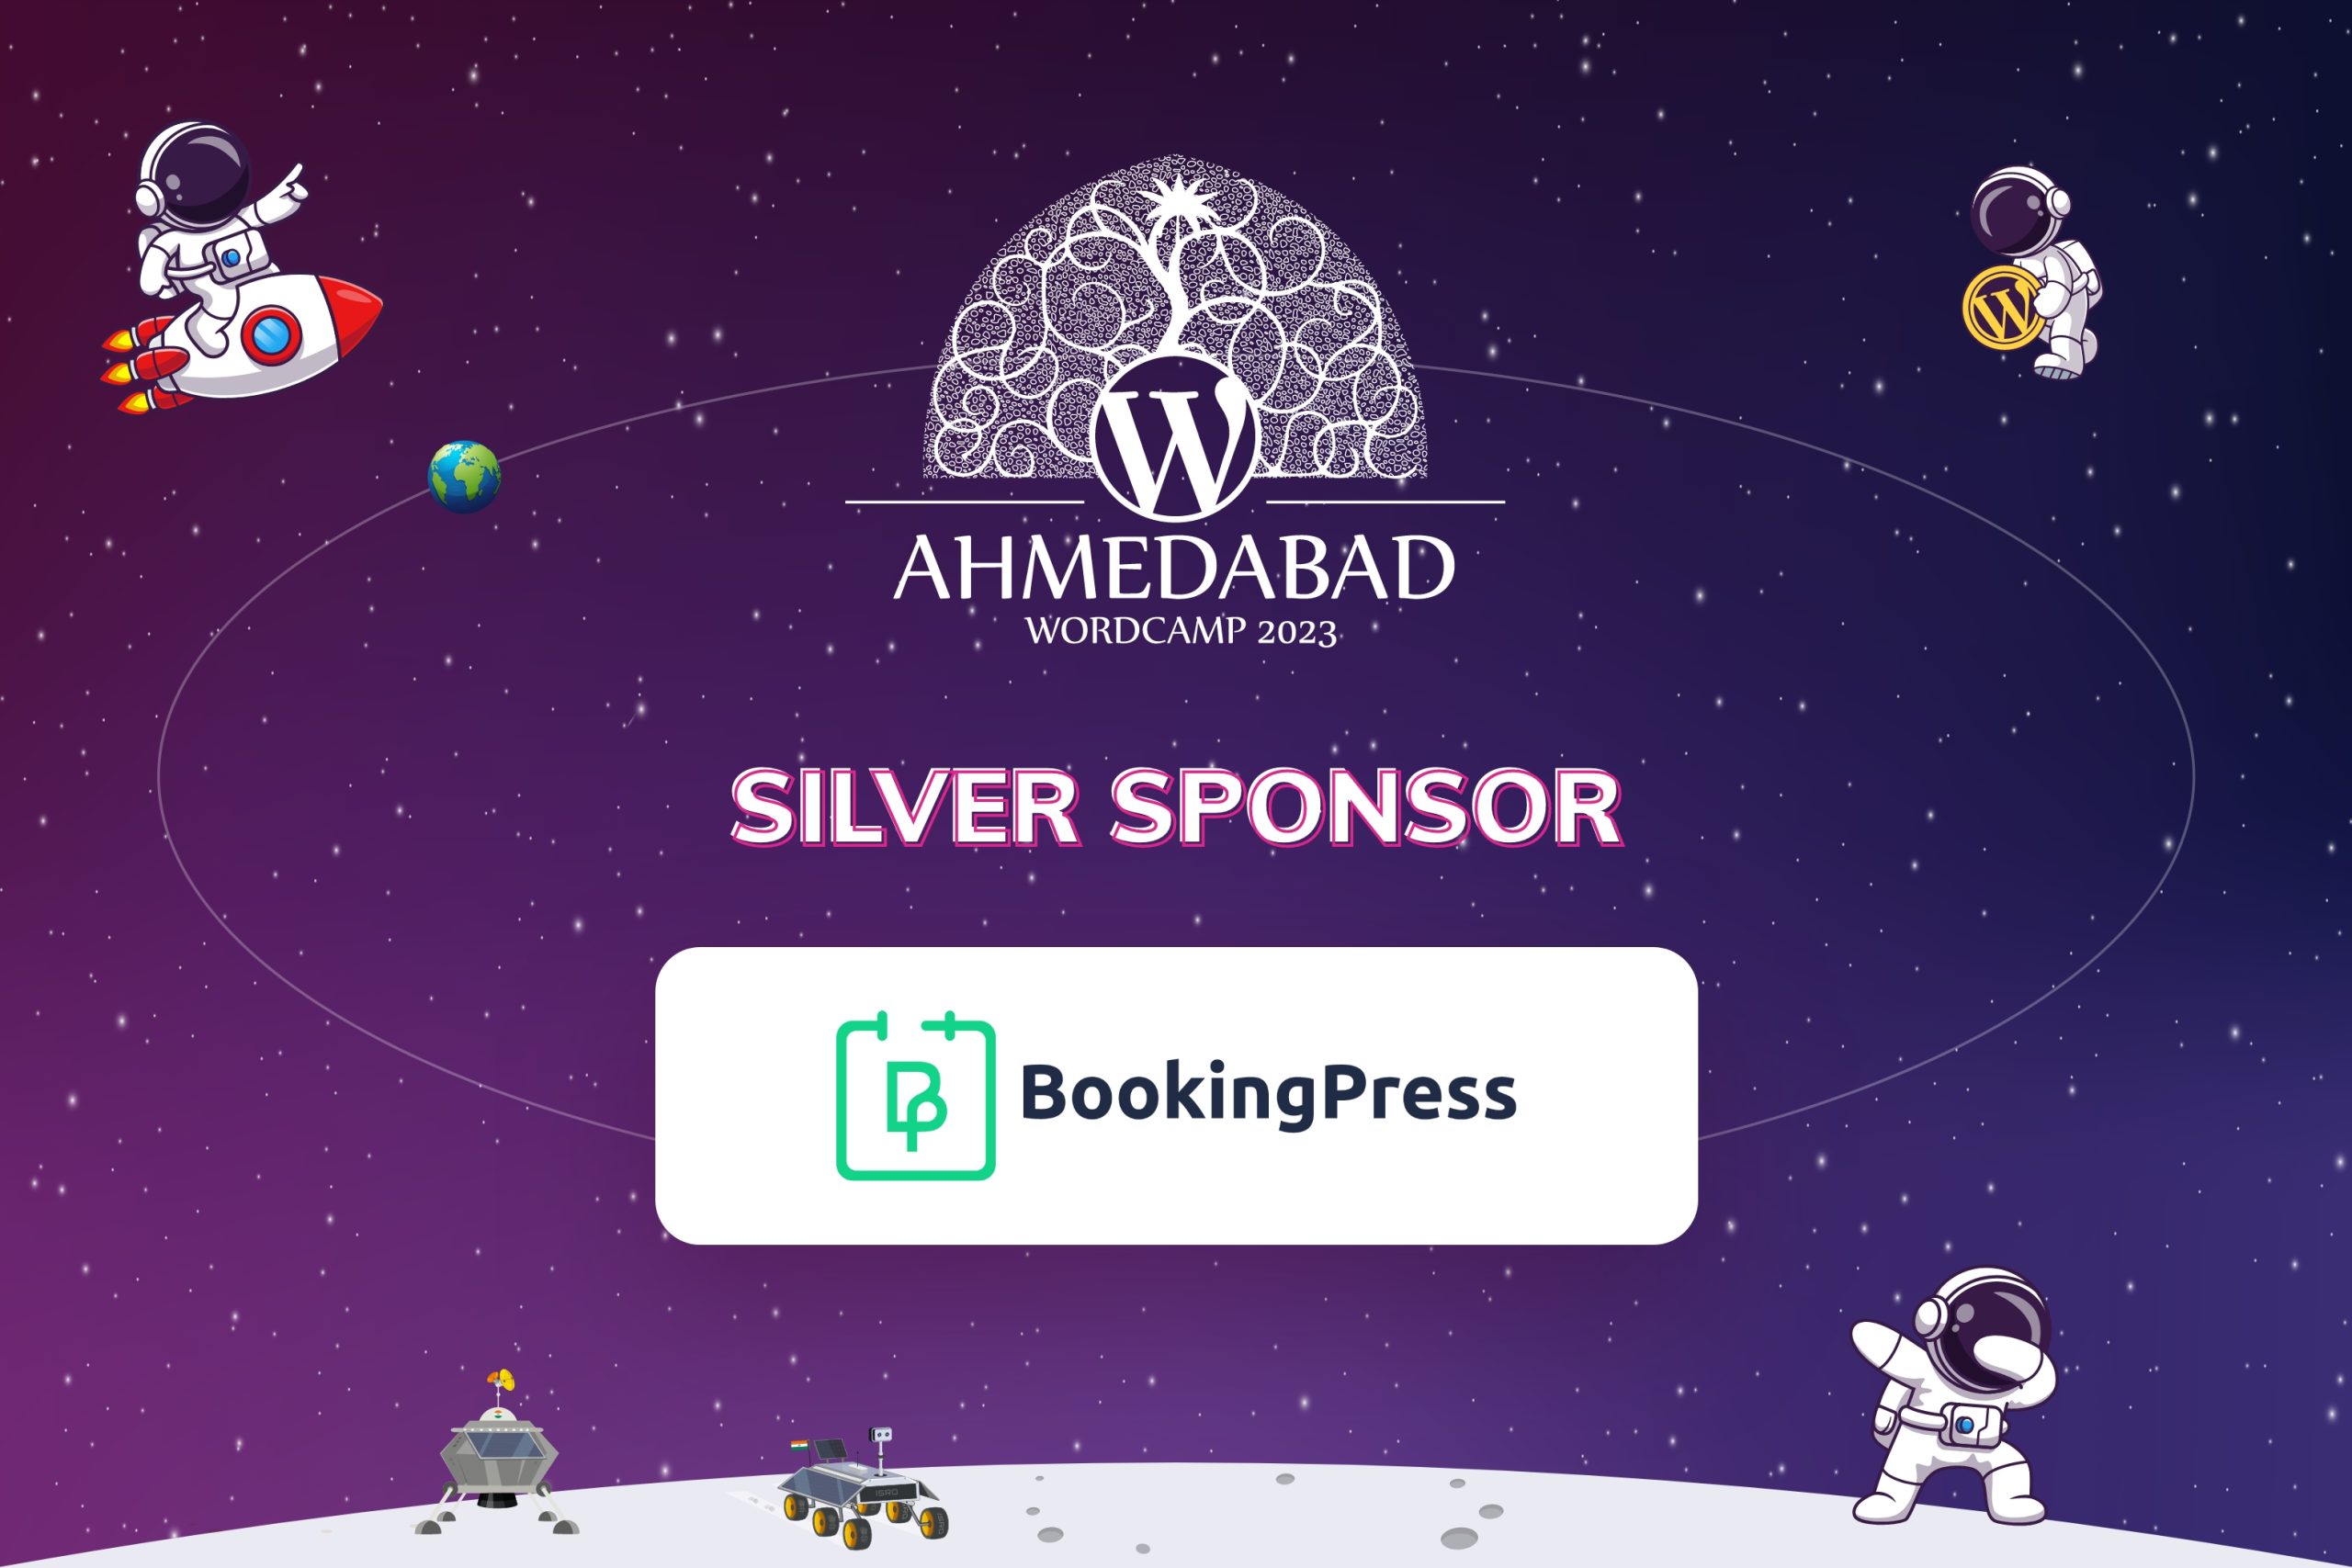 Thank You BookingPress, for being our Silver Sponsor